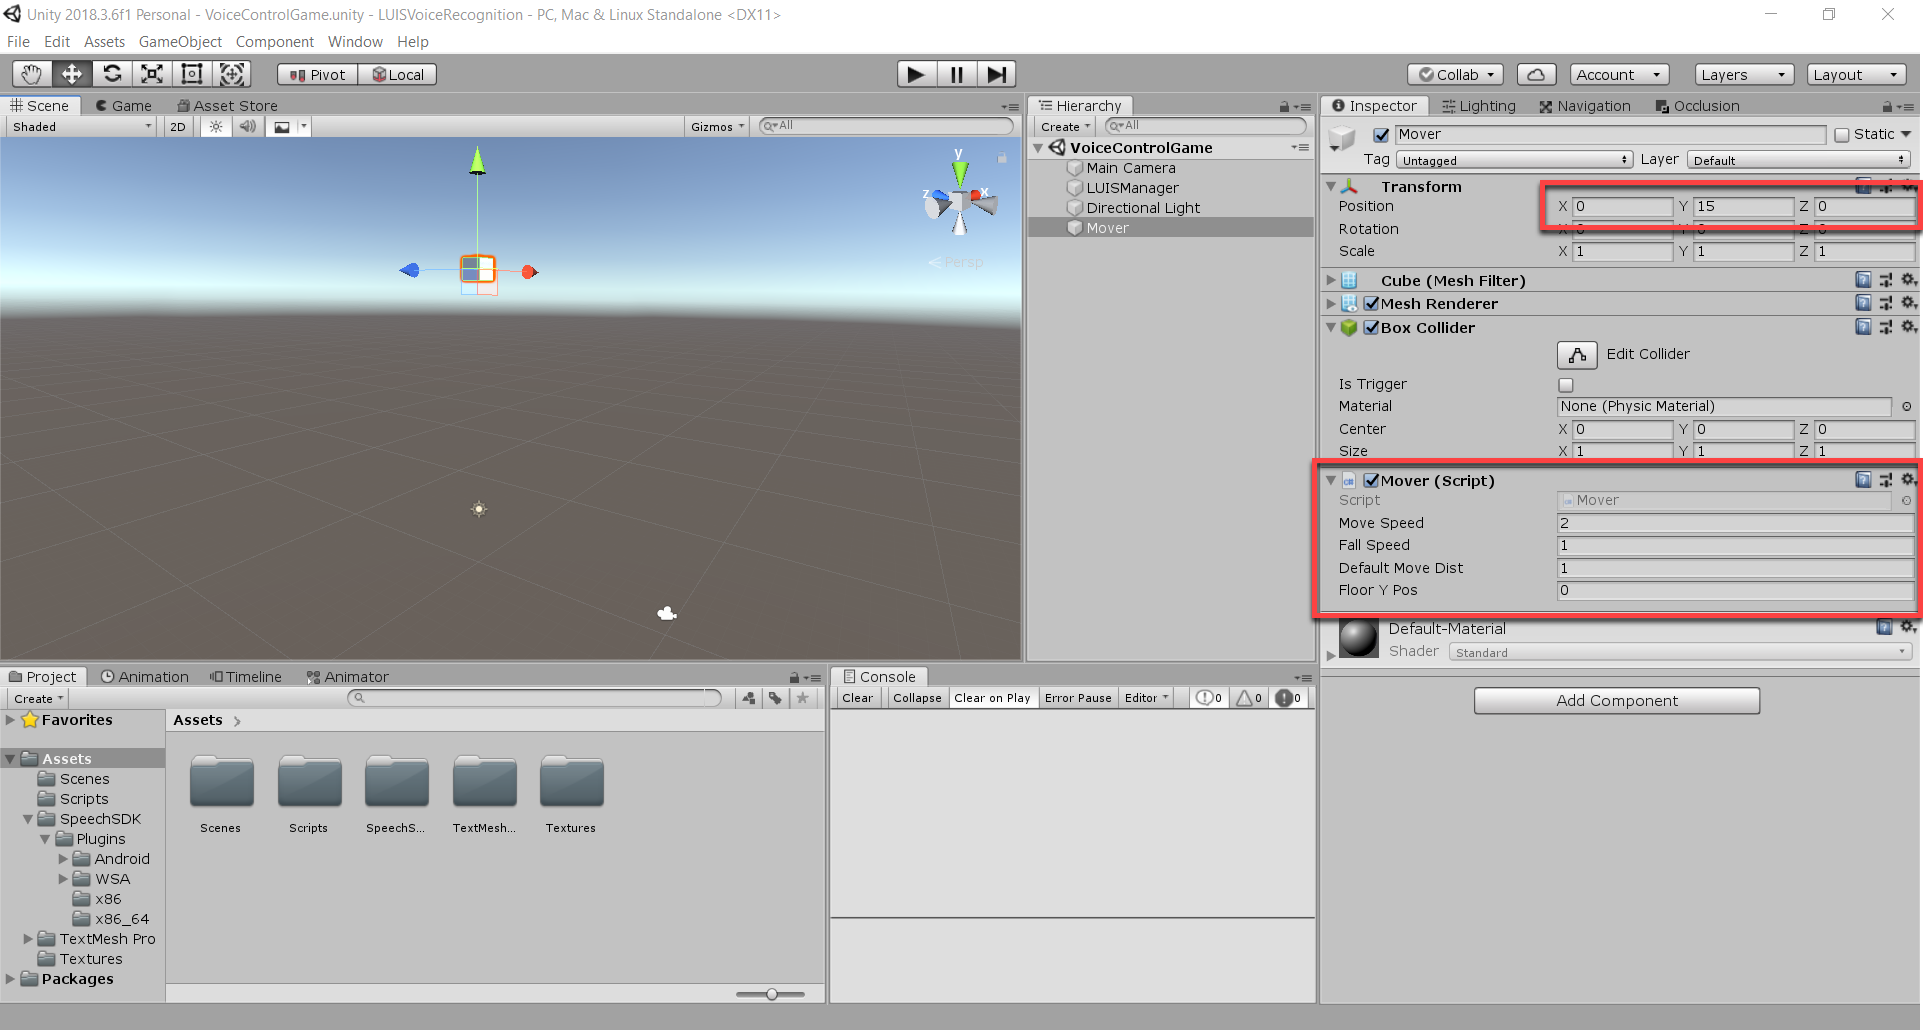 Script added to Rover object in Unity